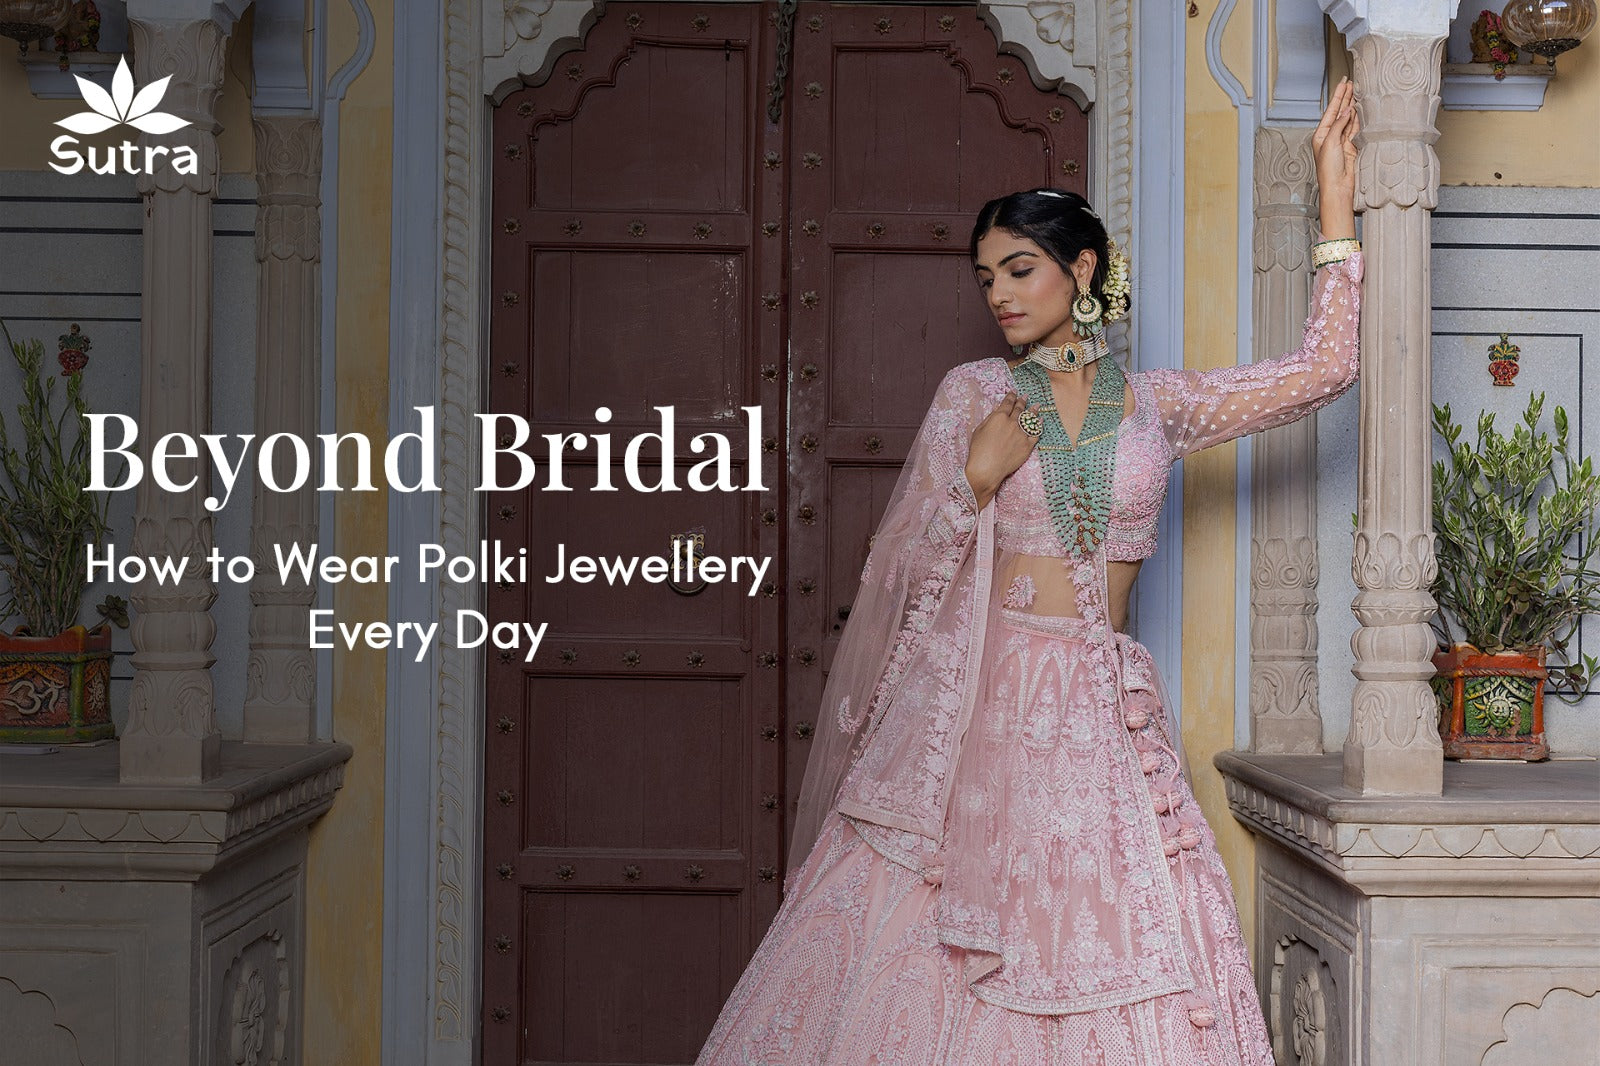 Beyond Bridal: How to Wear Polki Jewellery Every Day